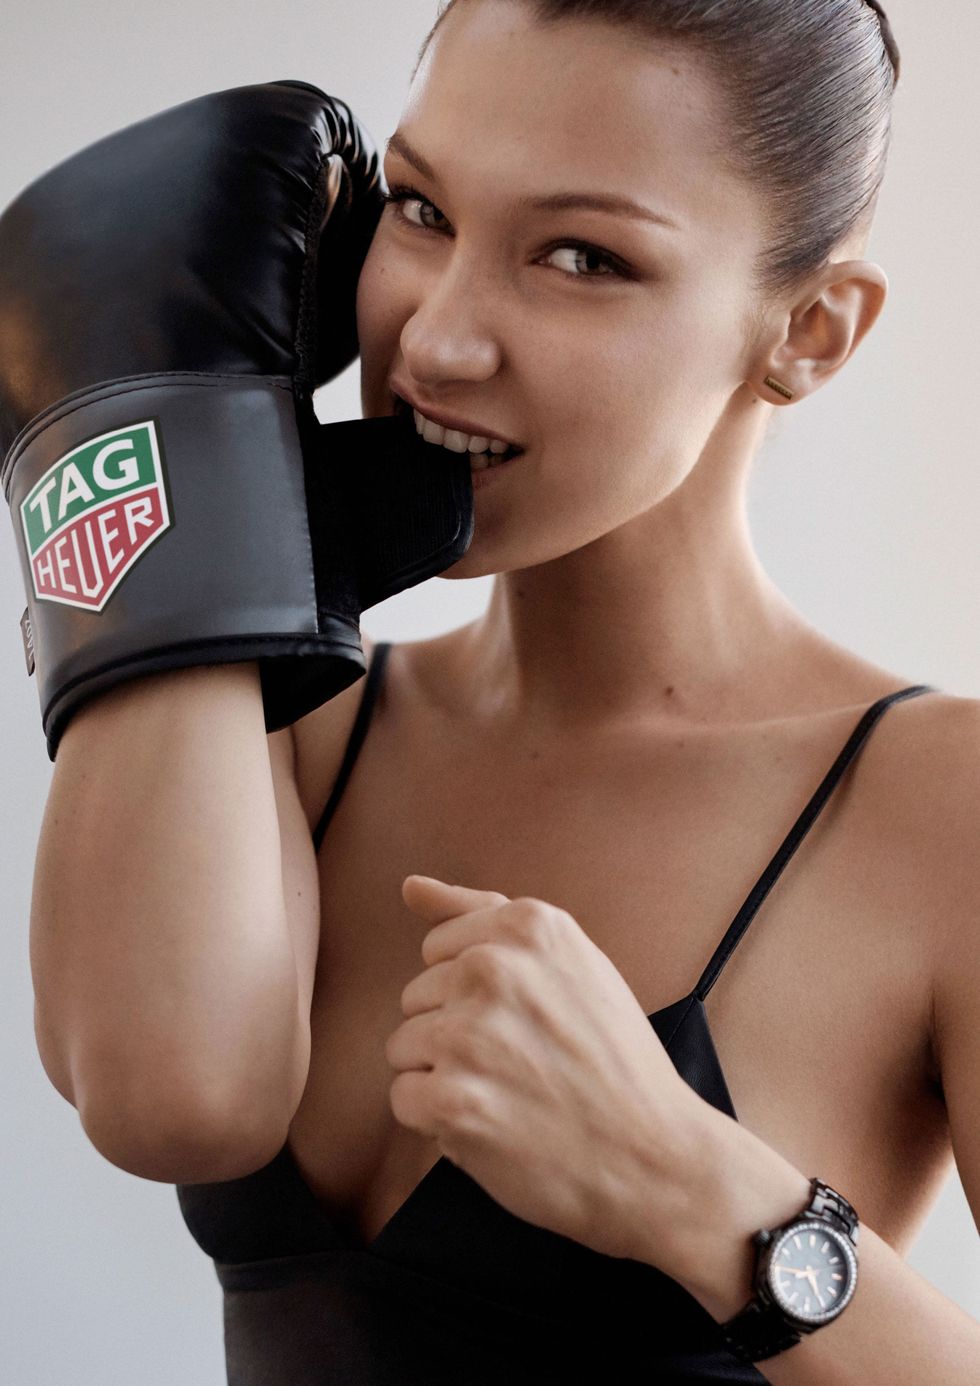 Boxing glove, Boxing, Boxing equipment, Arm, Kickboxing, Striking combat sports, Punch, Combat sport, Contact sport, Glove, 